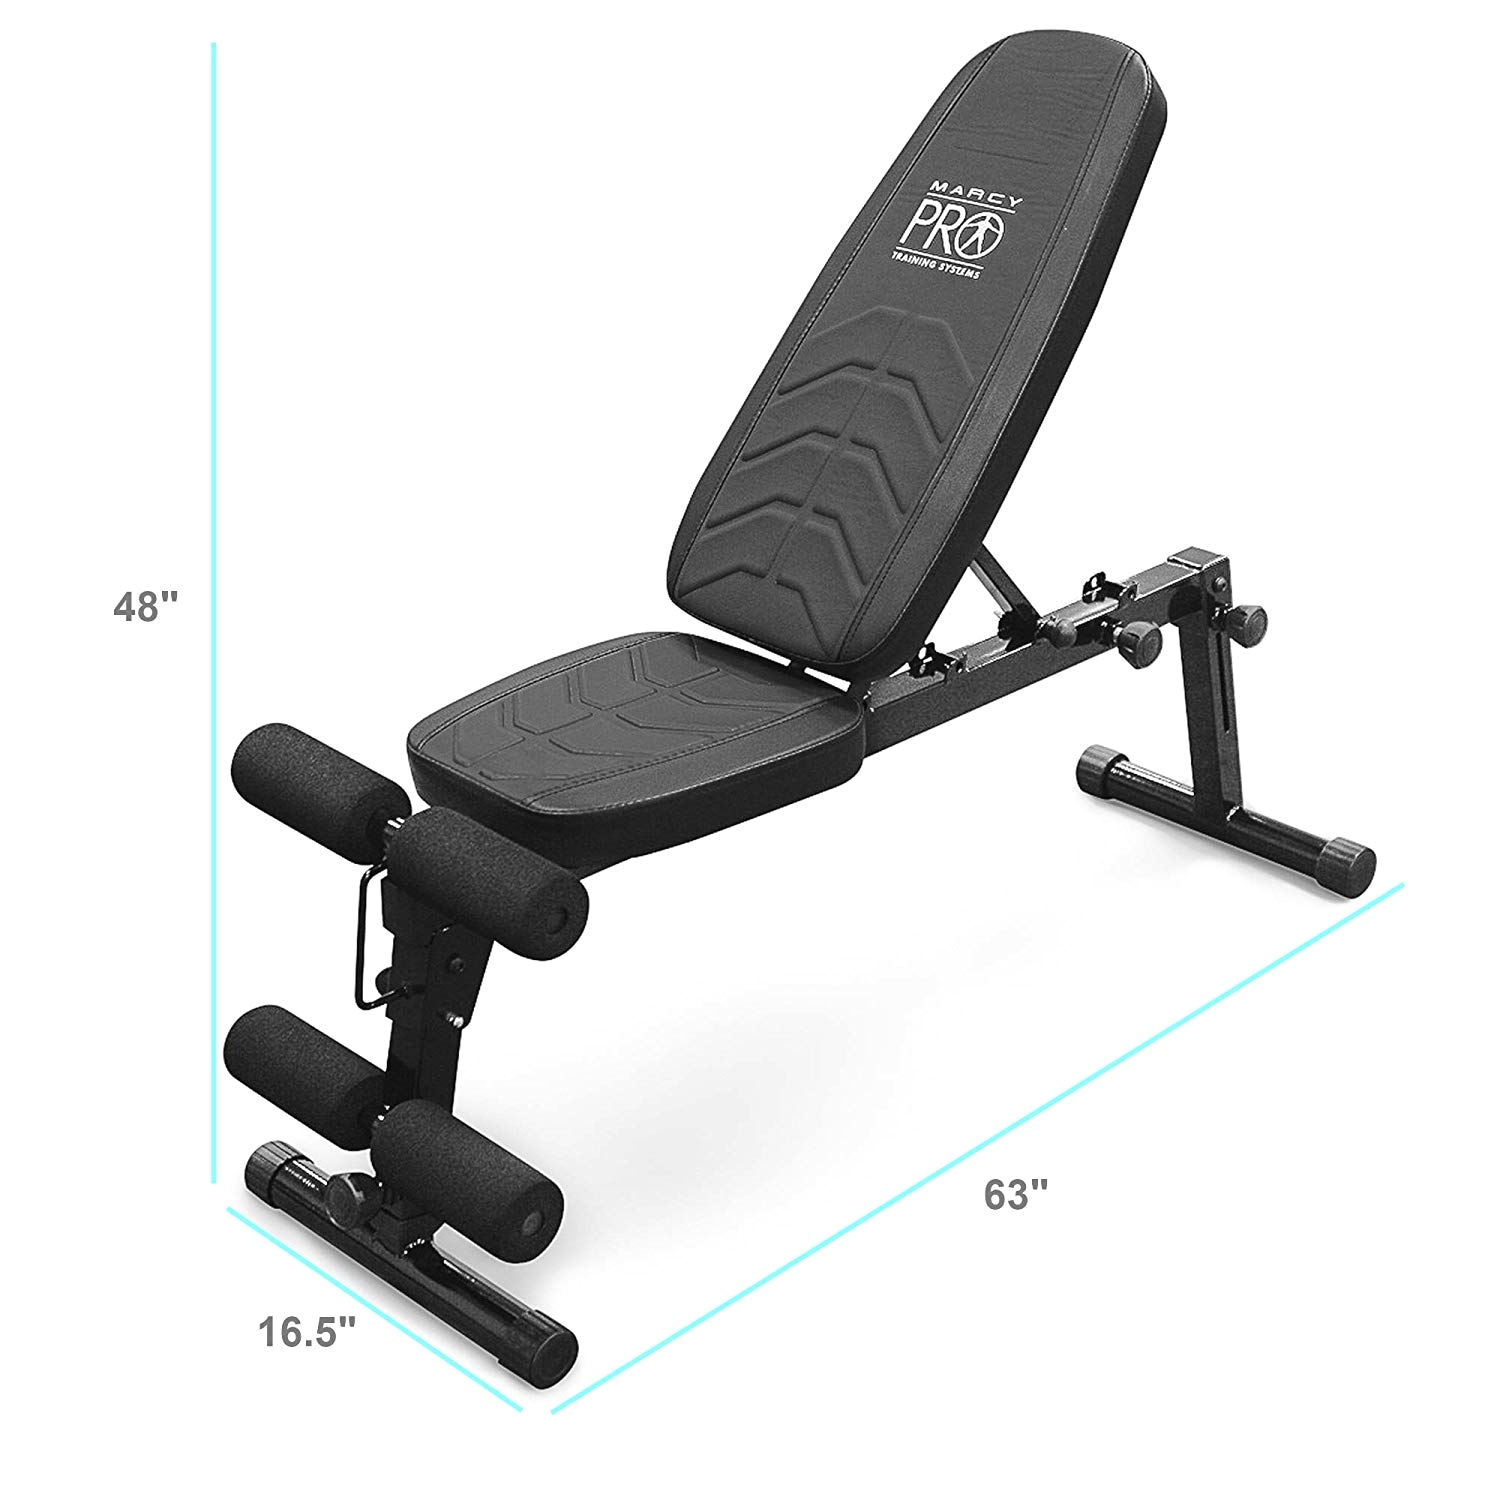 amazon com marcy pro adjustable exercise weightlifting workout utility weight bench with leg developer and foam roller pads pm 10110 sports outdoors